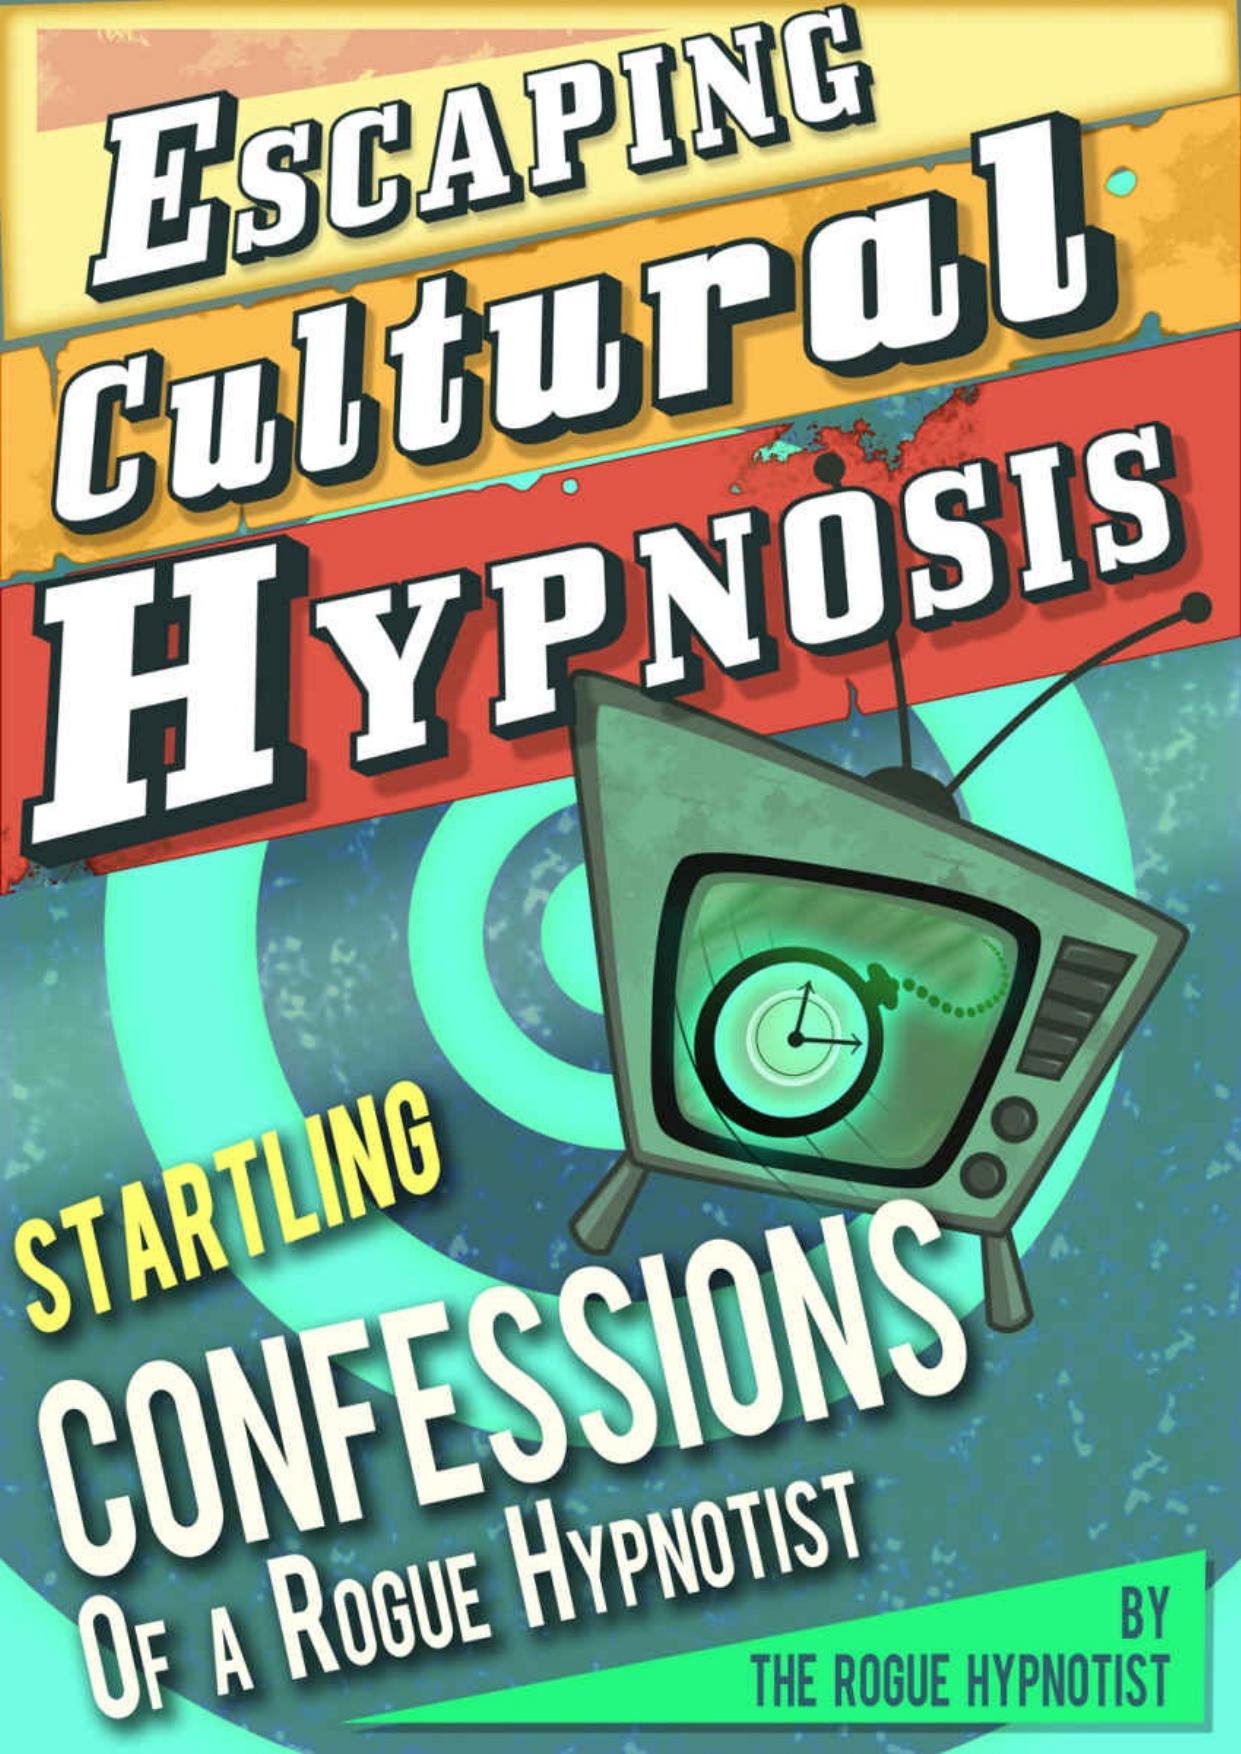 Escaping Cultural Hypnosis - Startling Confessions of a Rogue Hypnotist! by The Rogue Hypnotist